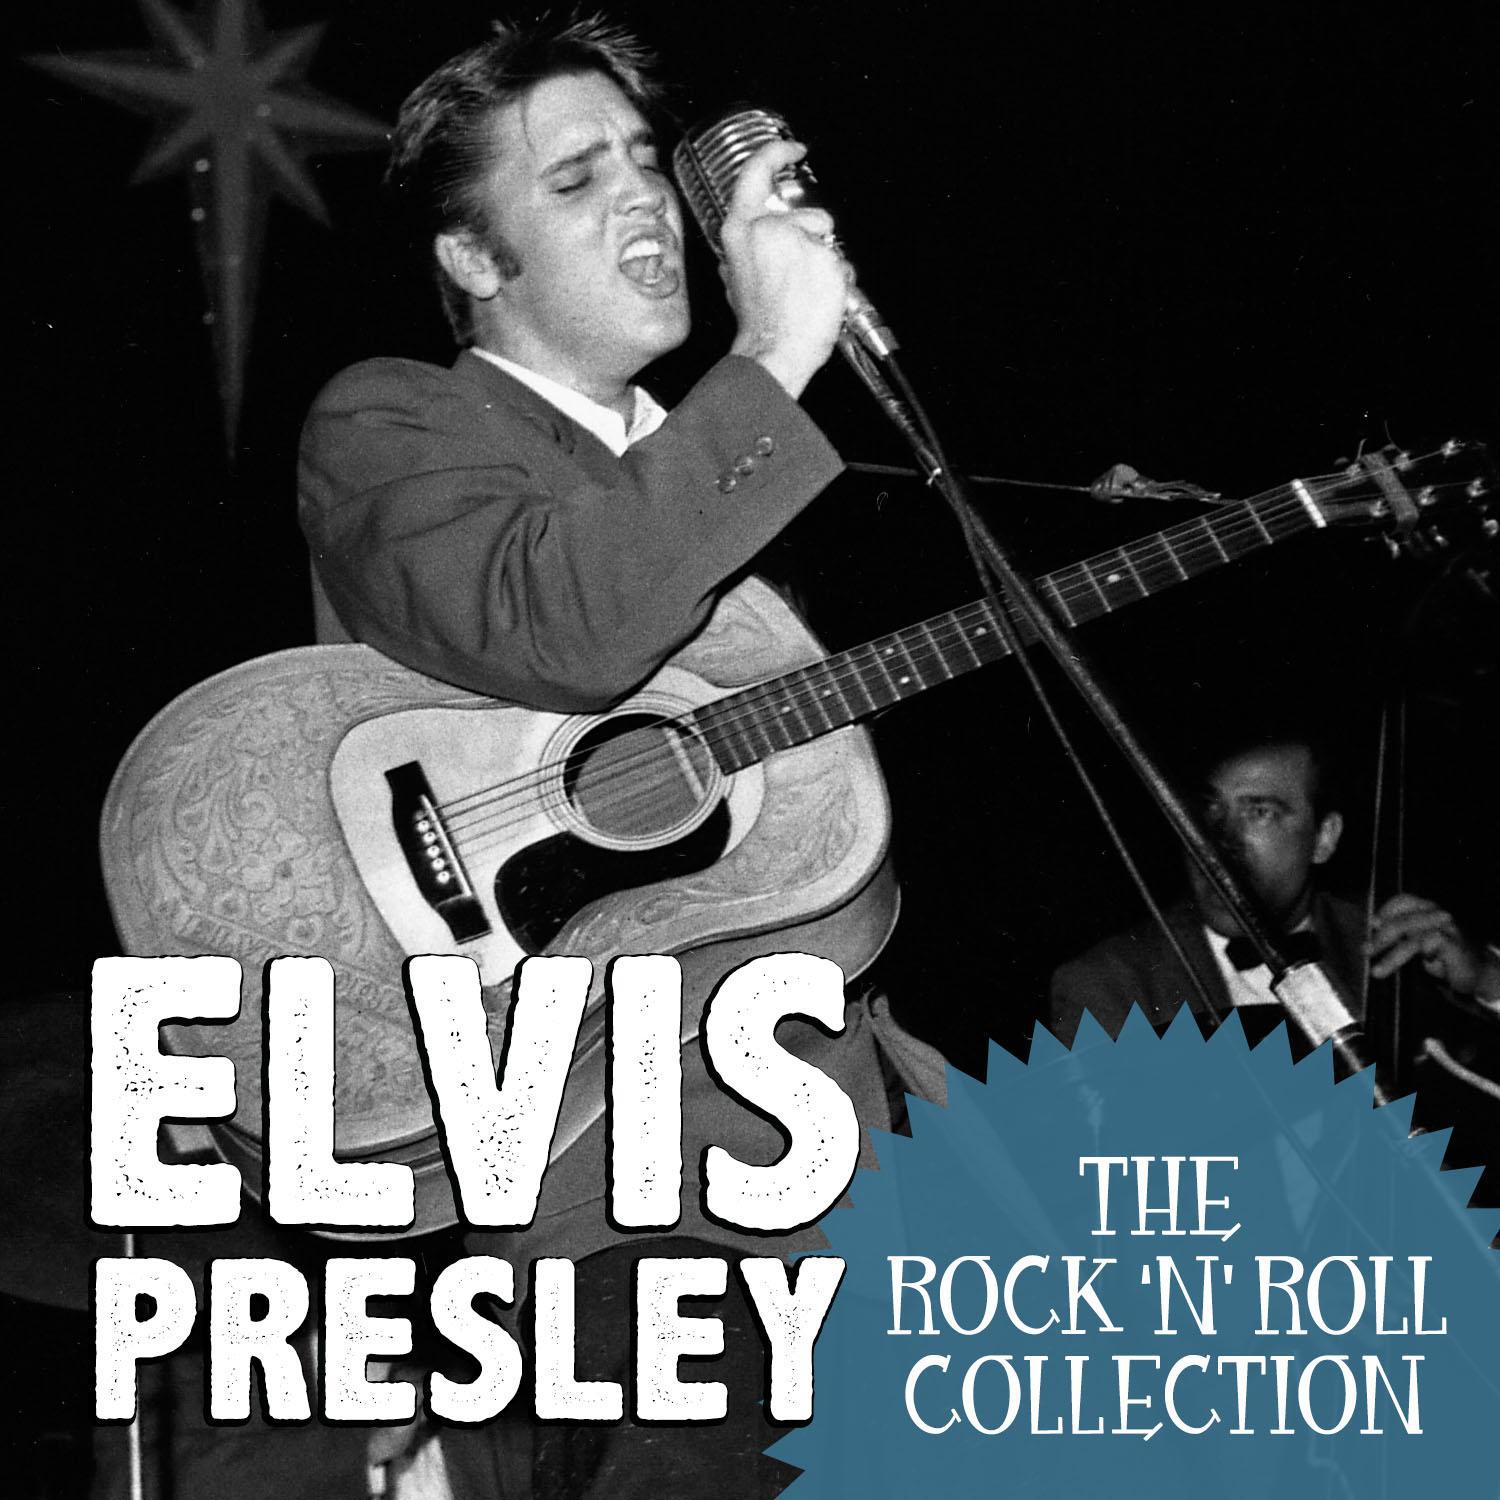 The Rock 'N' Roll Collection: Elvis Presley